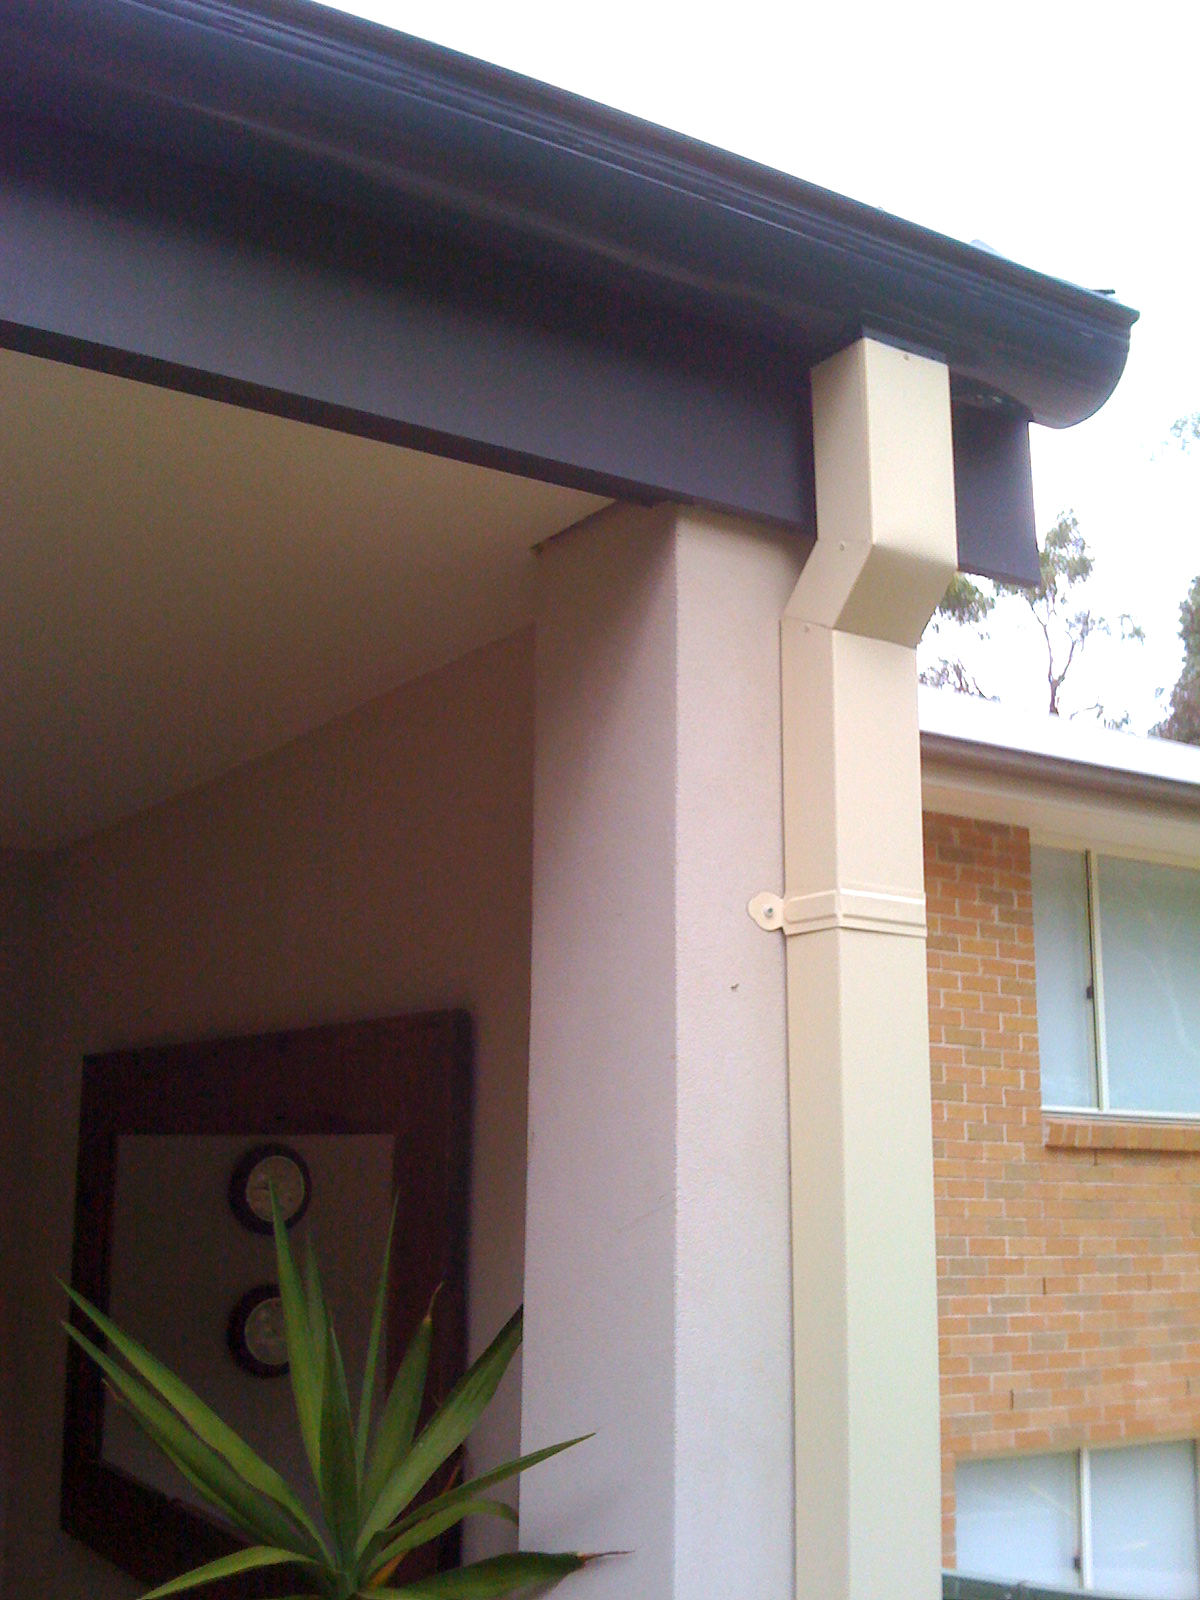 guttering and downpipes